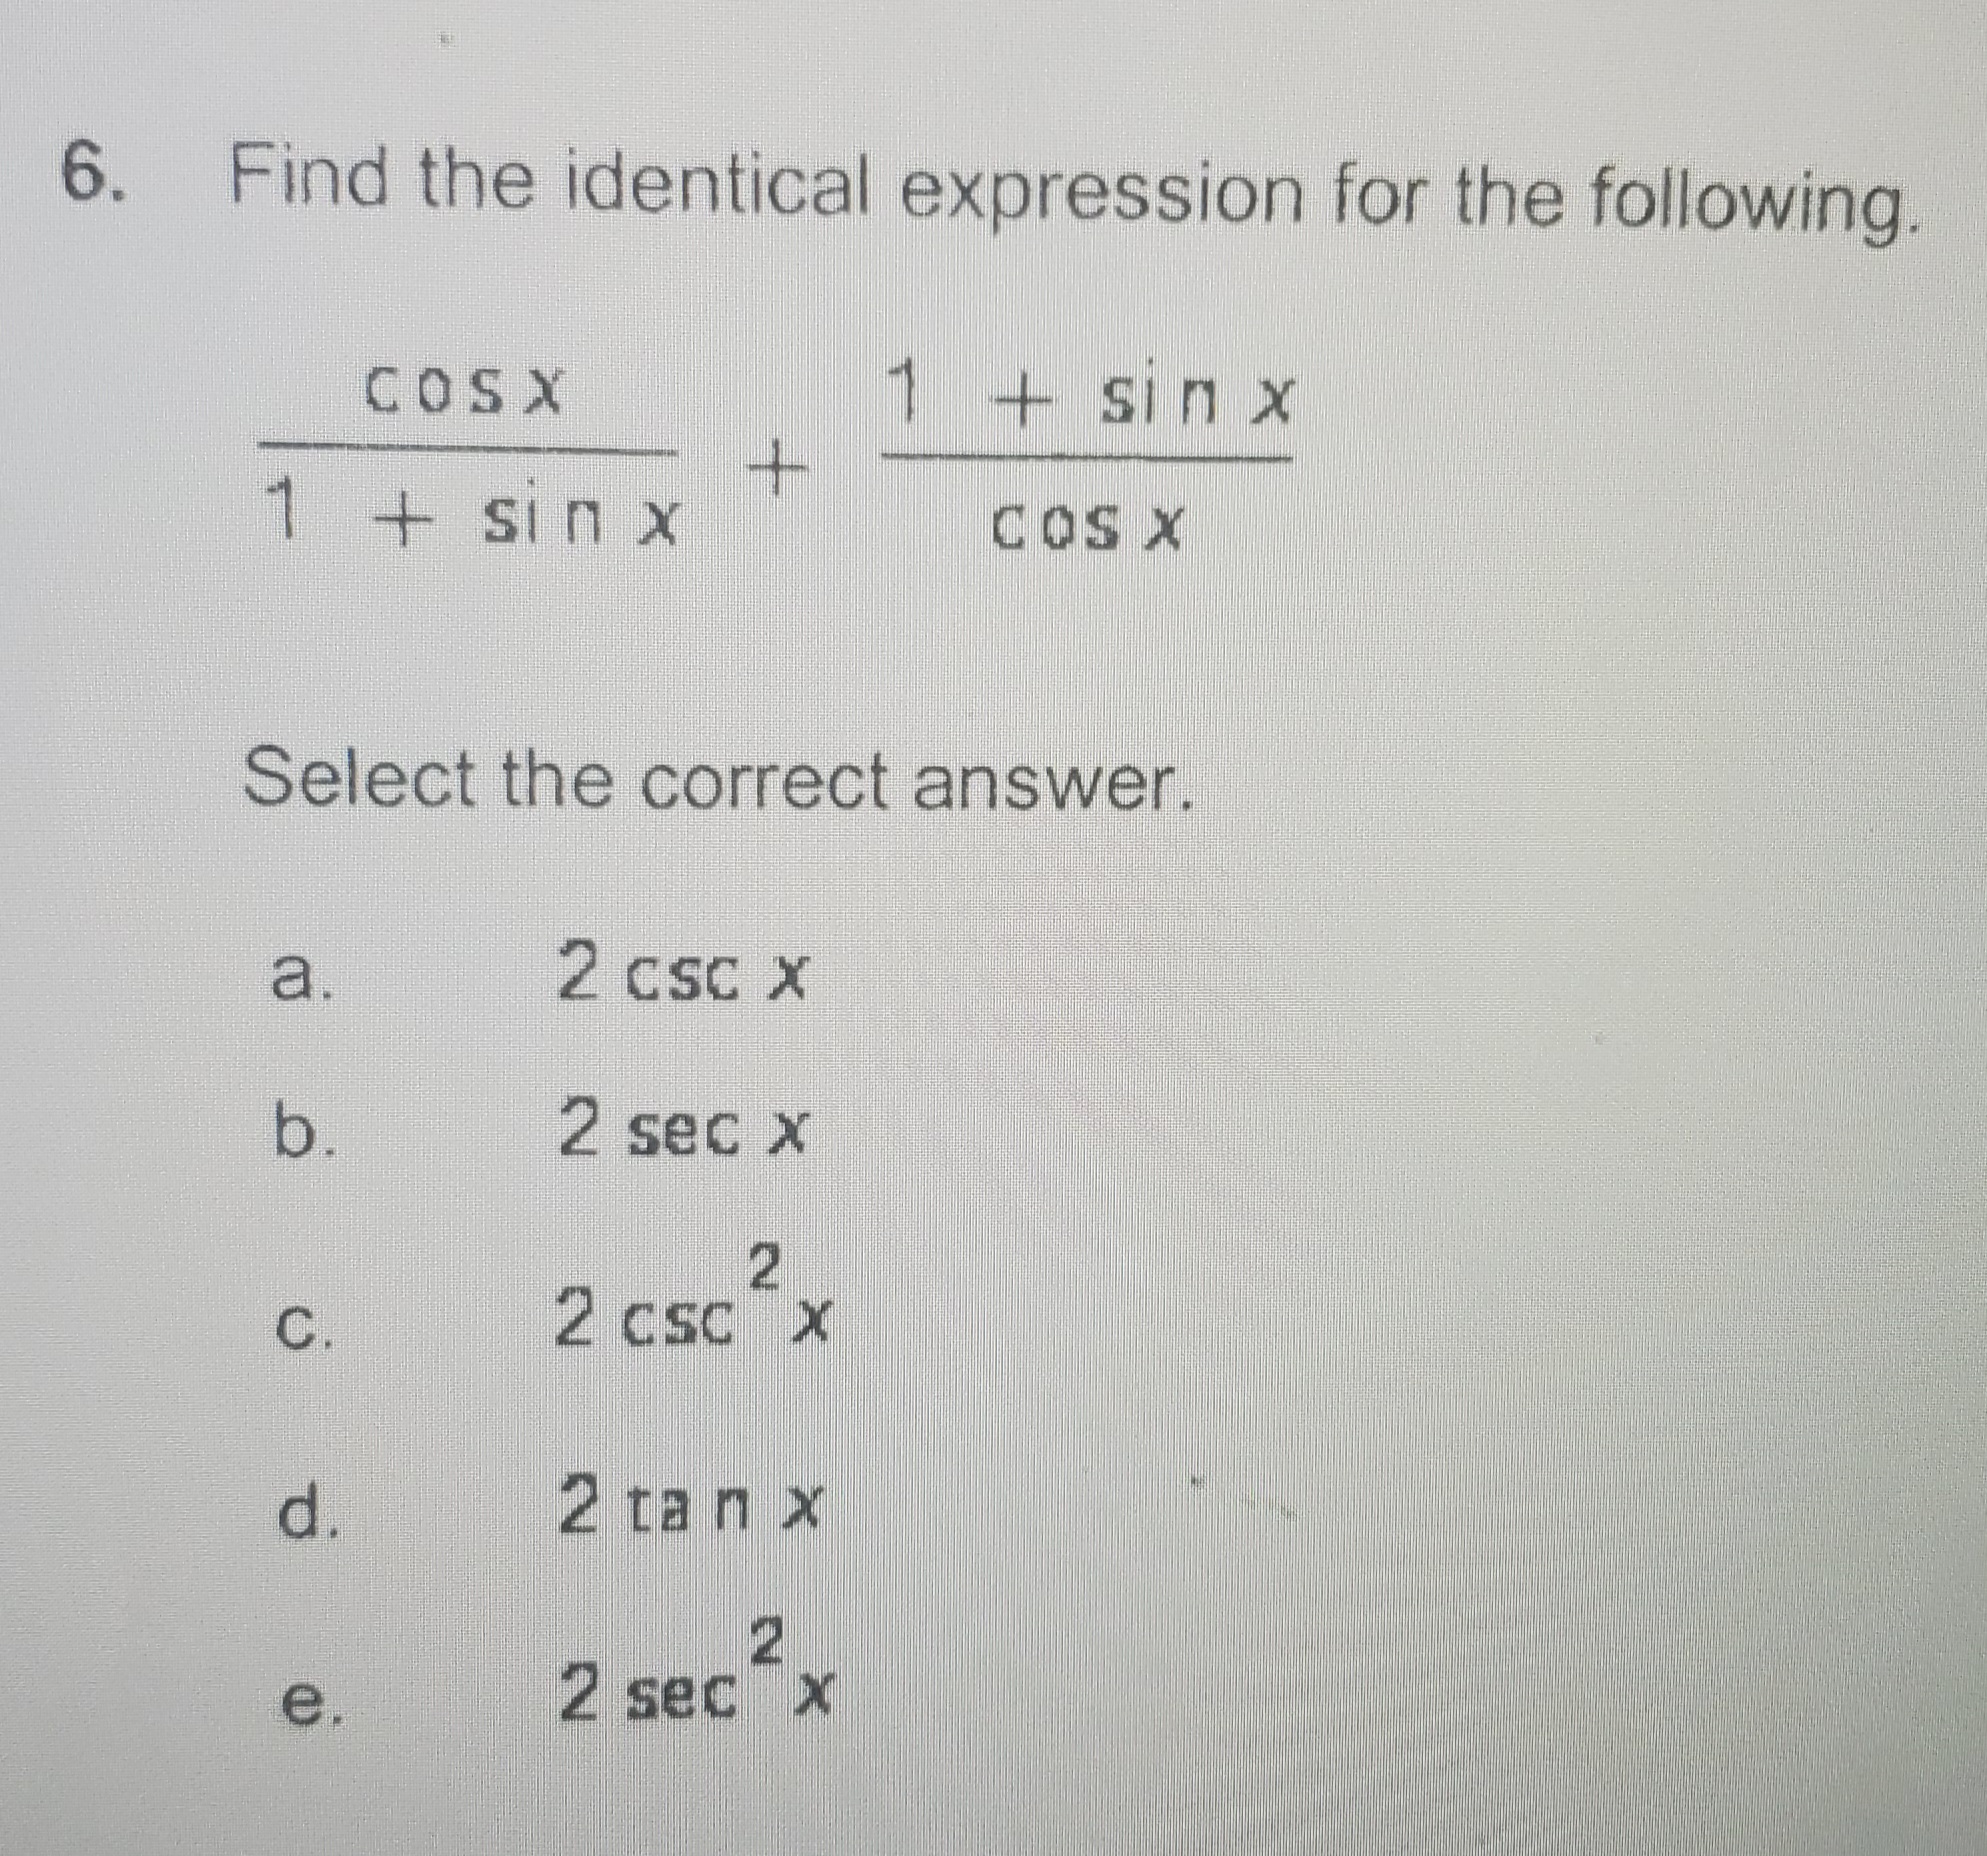 6. Find the identical expression for the following
COSX
1+sin x
1 + sin x
COS X
Select the correct answer.
a.
2 csc X
b.
2 sec x
2 csc x
cSC X
d.
2 tan x
e.
2 sec x
C.
